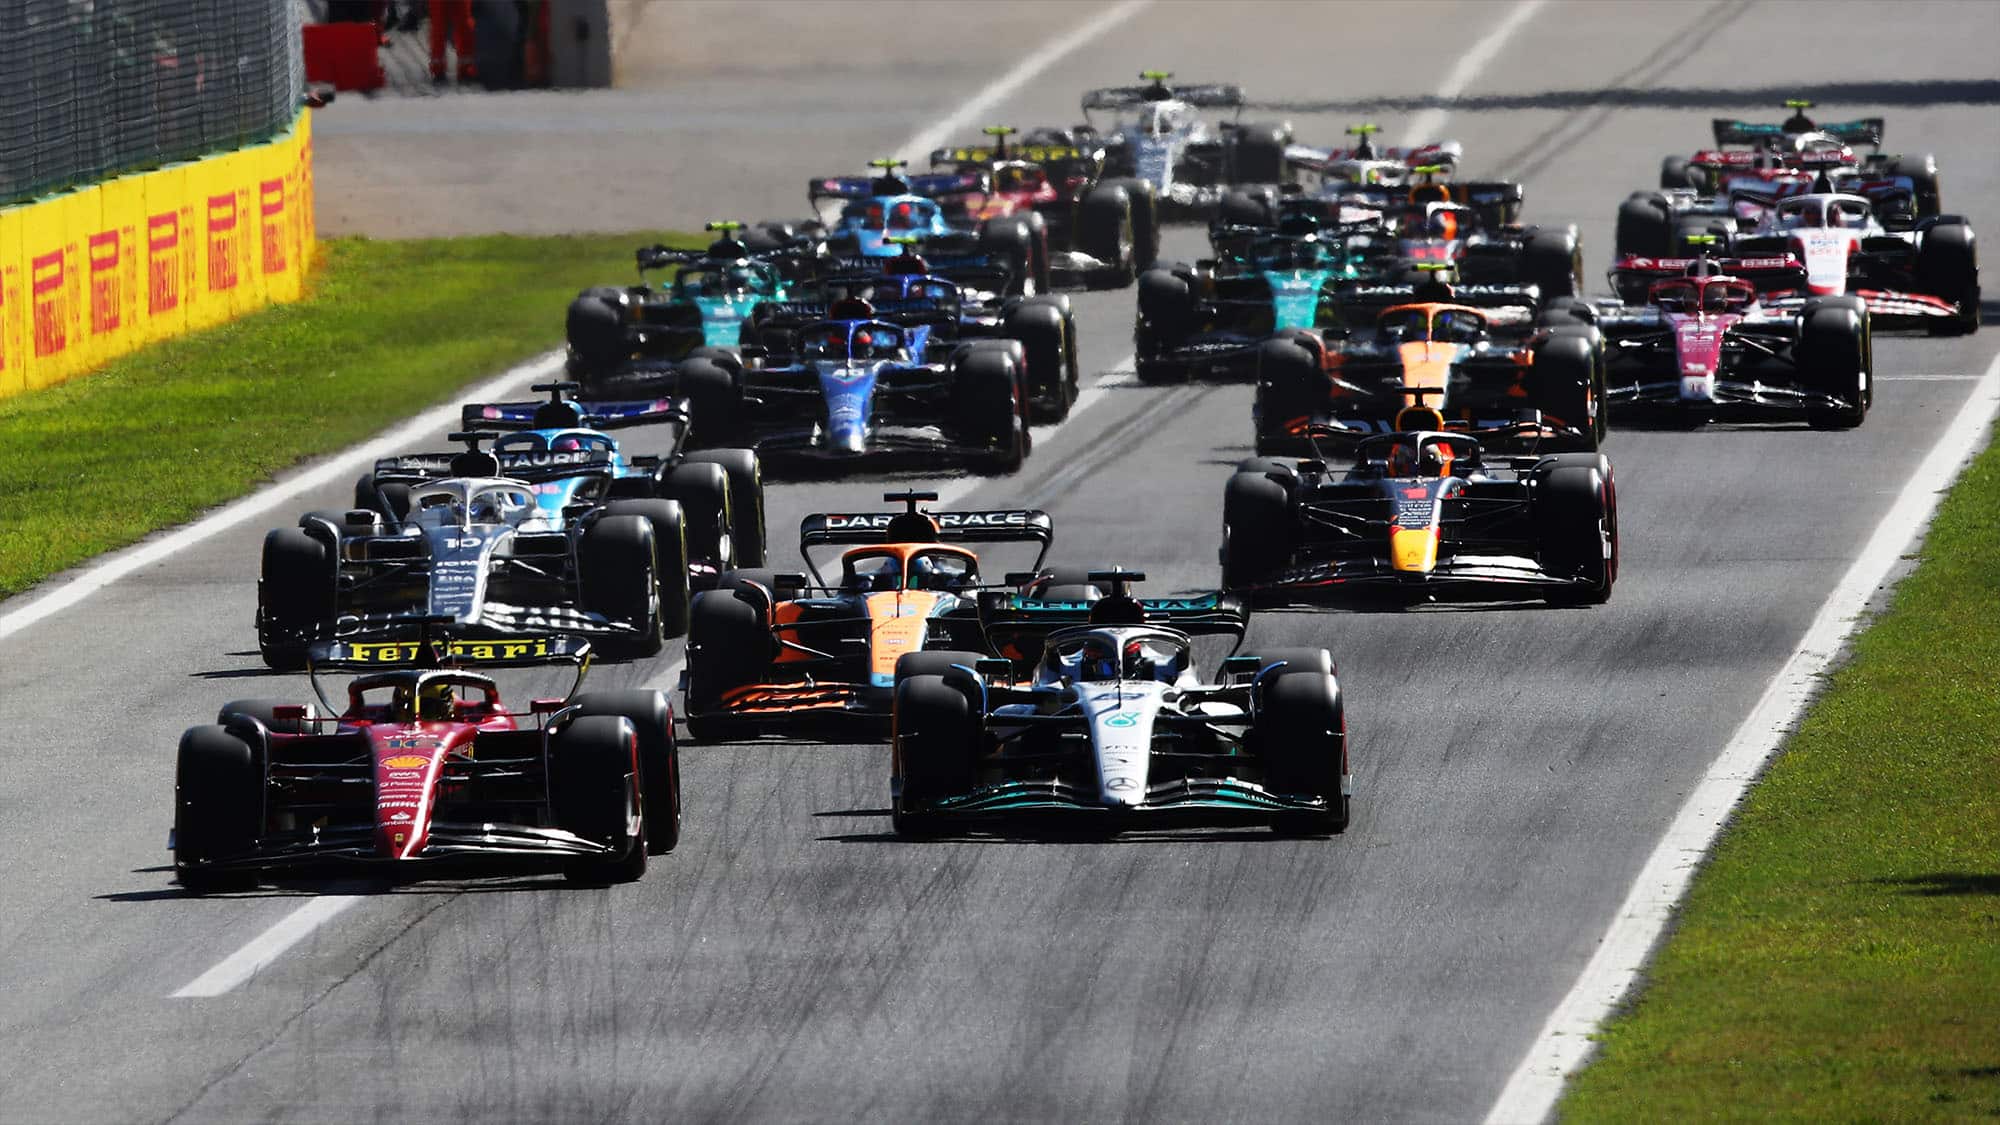 How to watch 2023 Italian Grand Prix F1 live stream, TV schedule and start time